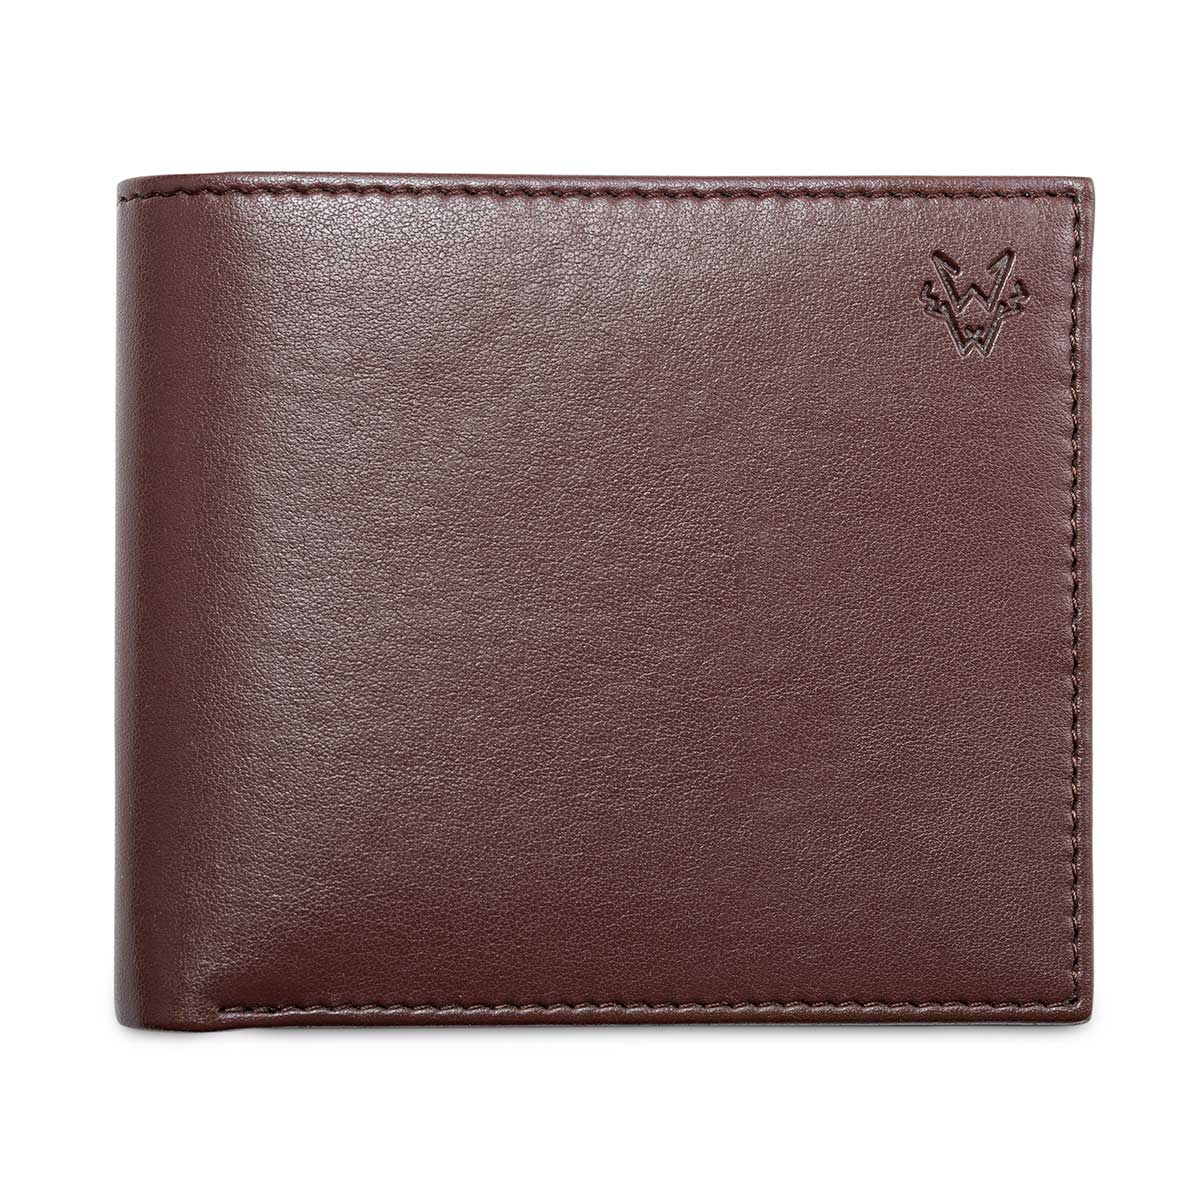 Bifold Vegan Corn Leather Wallet with Coin Pocket - Chestnut with Red